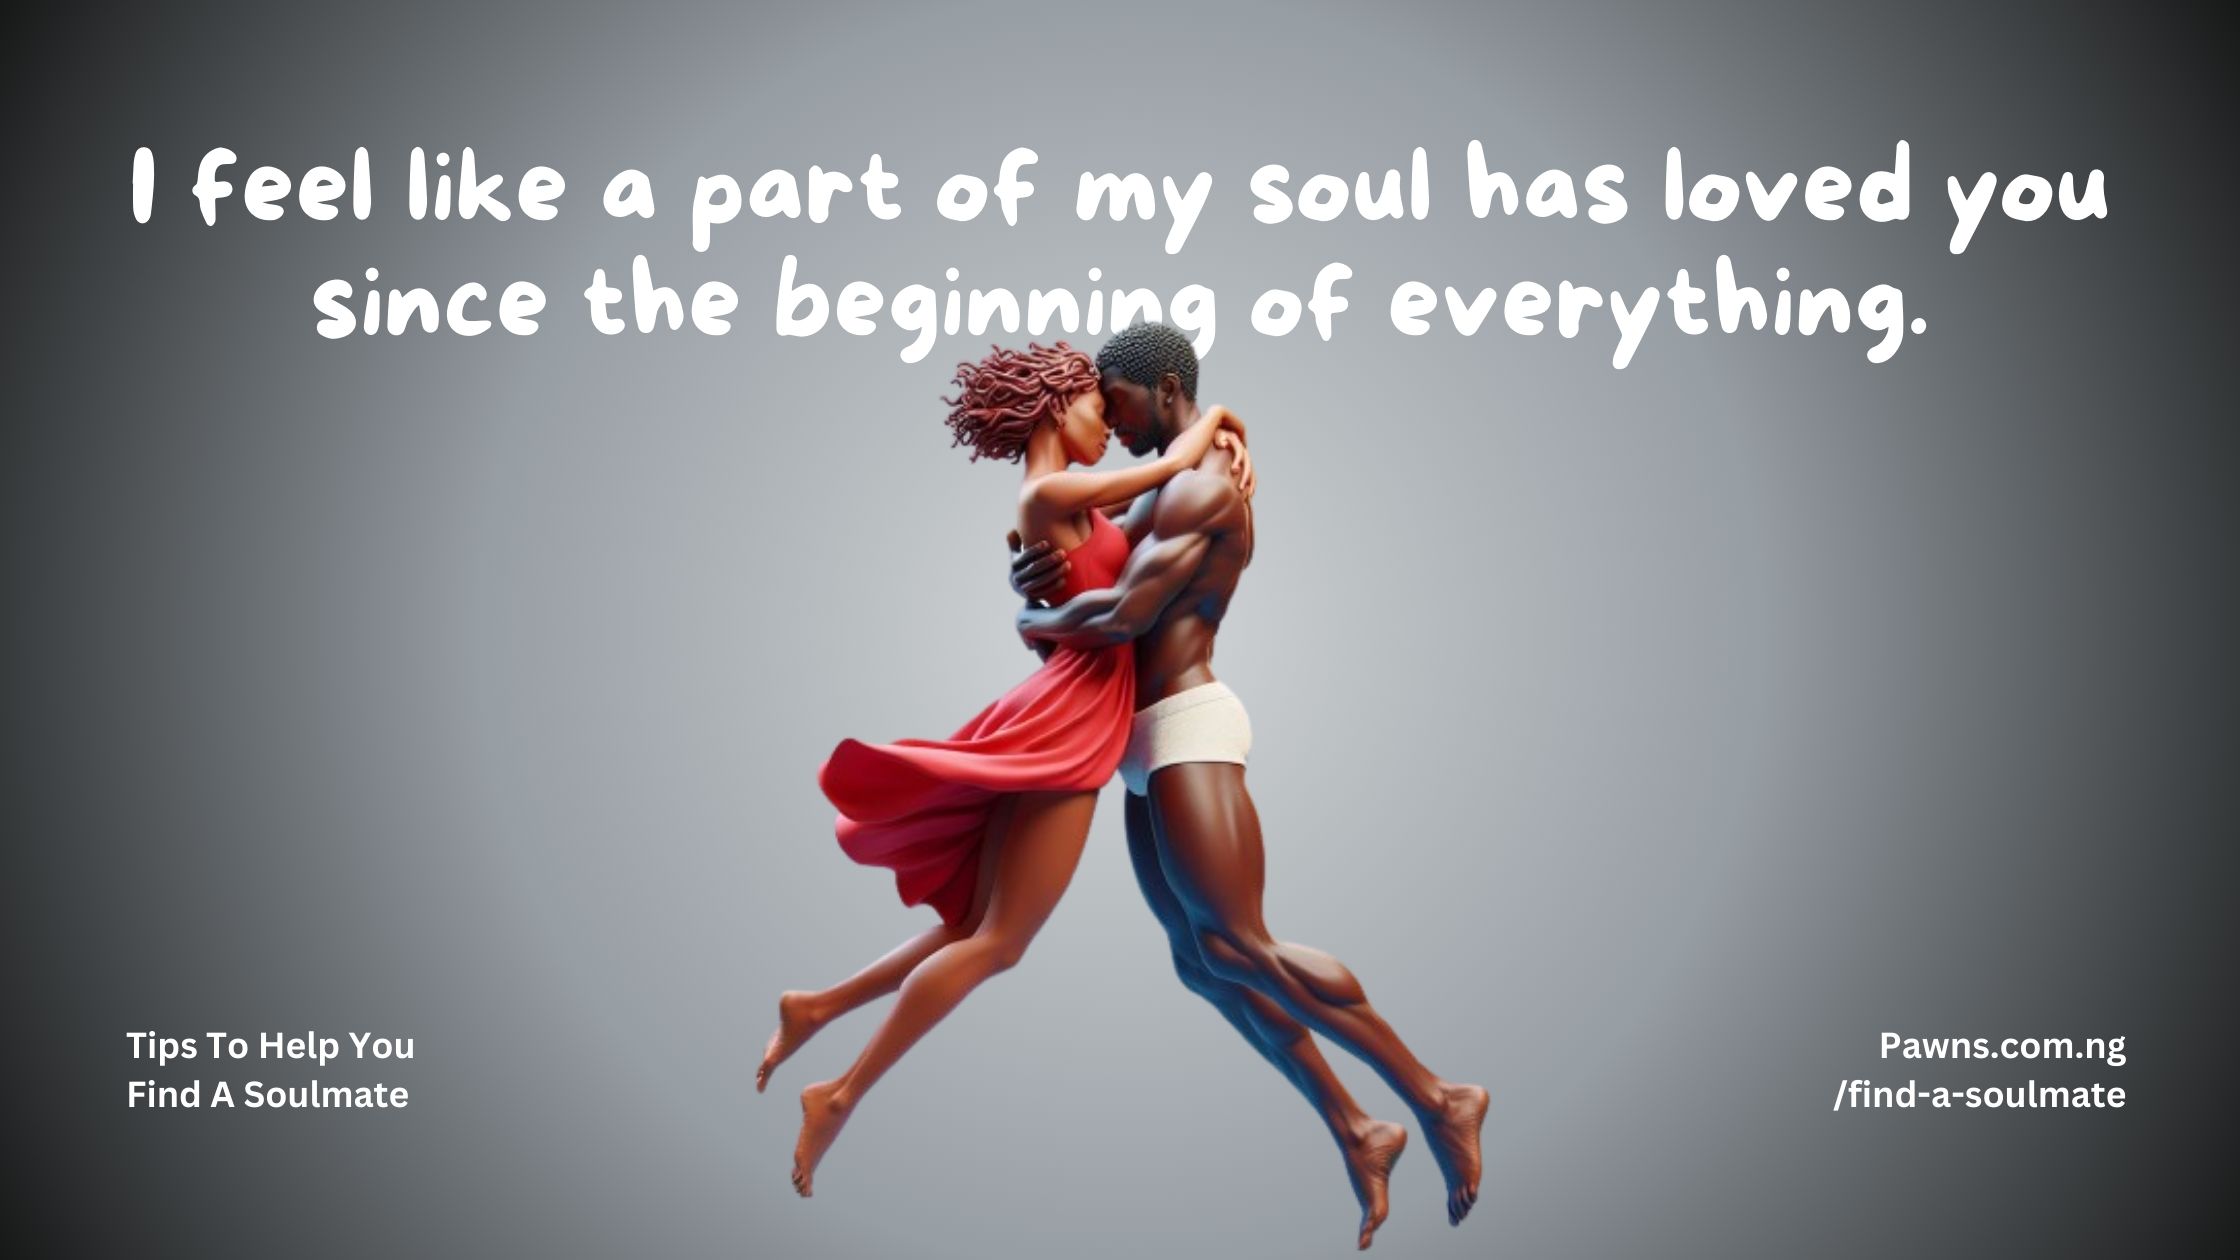 I feel like a part of my soul has loved you since the beginning of everything Tips To Help You Find A Soulmate